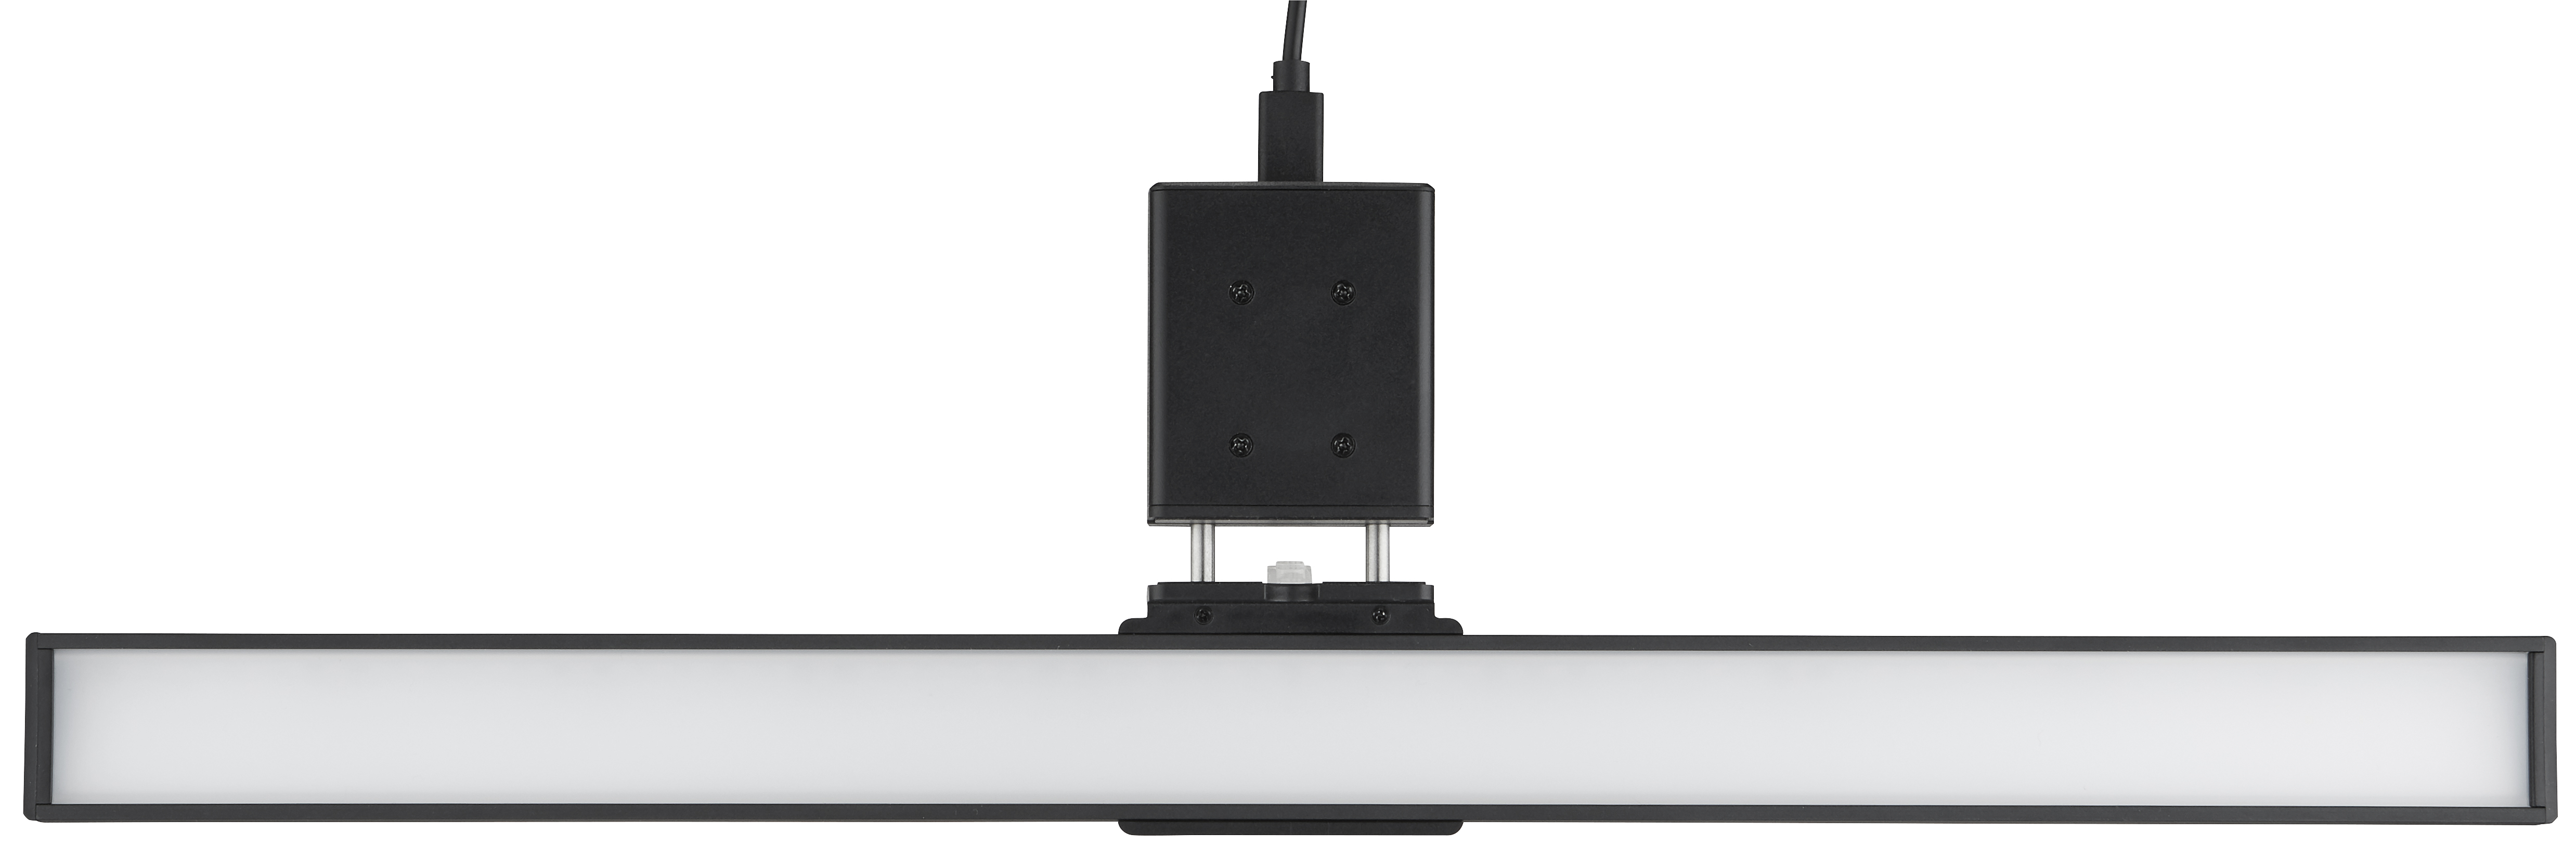 USB monitor lamp for bright and economical work in the office and home office